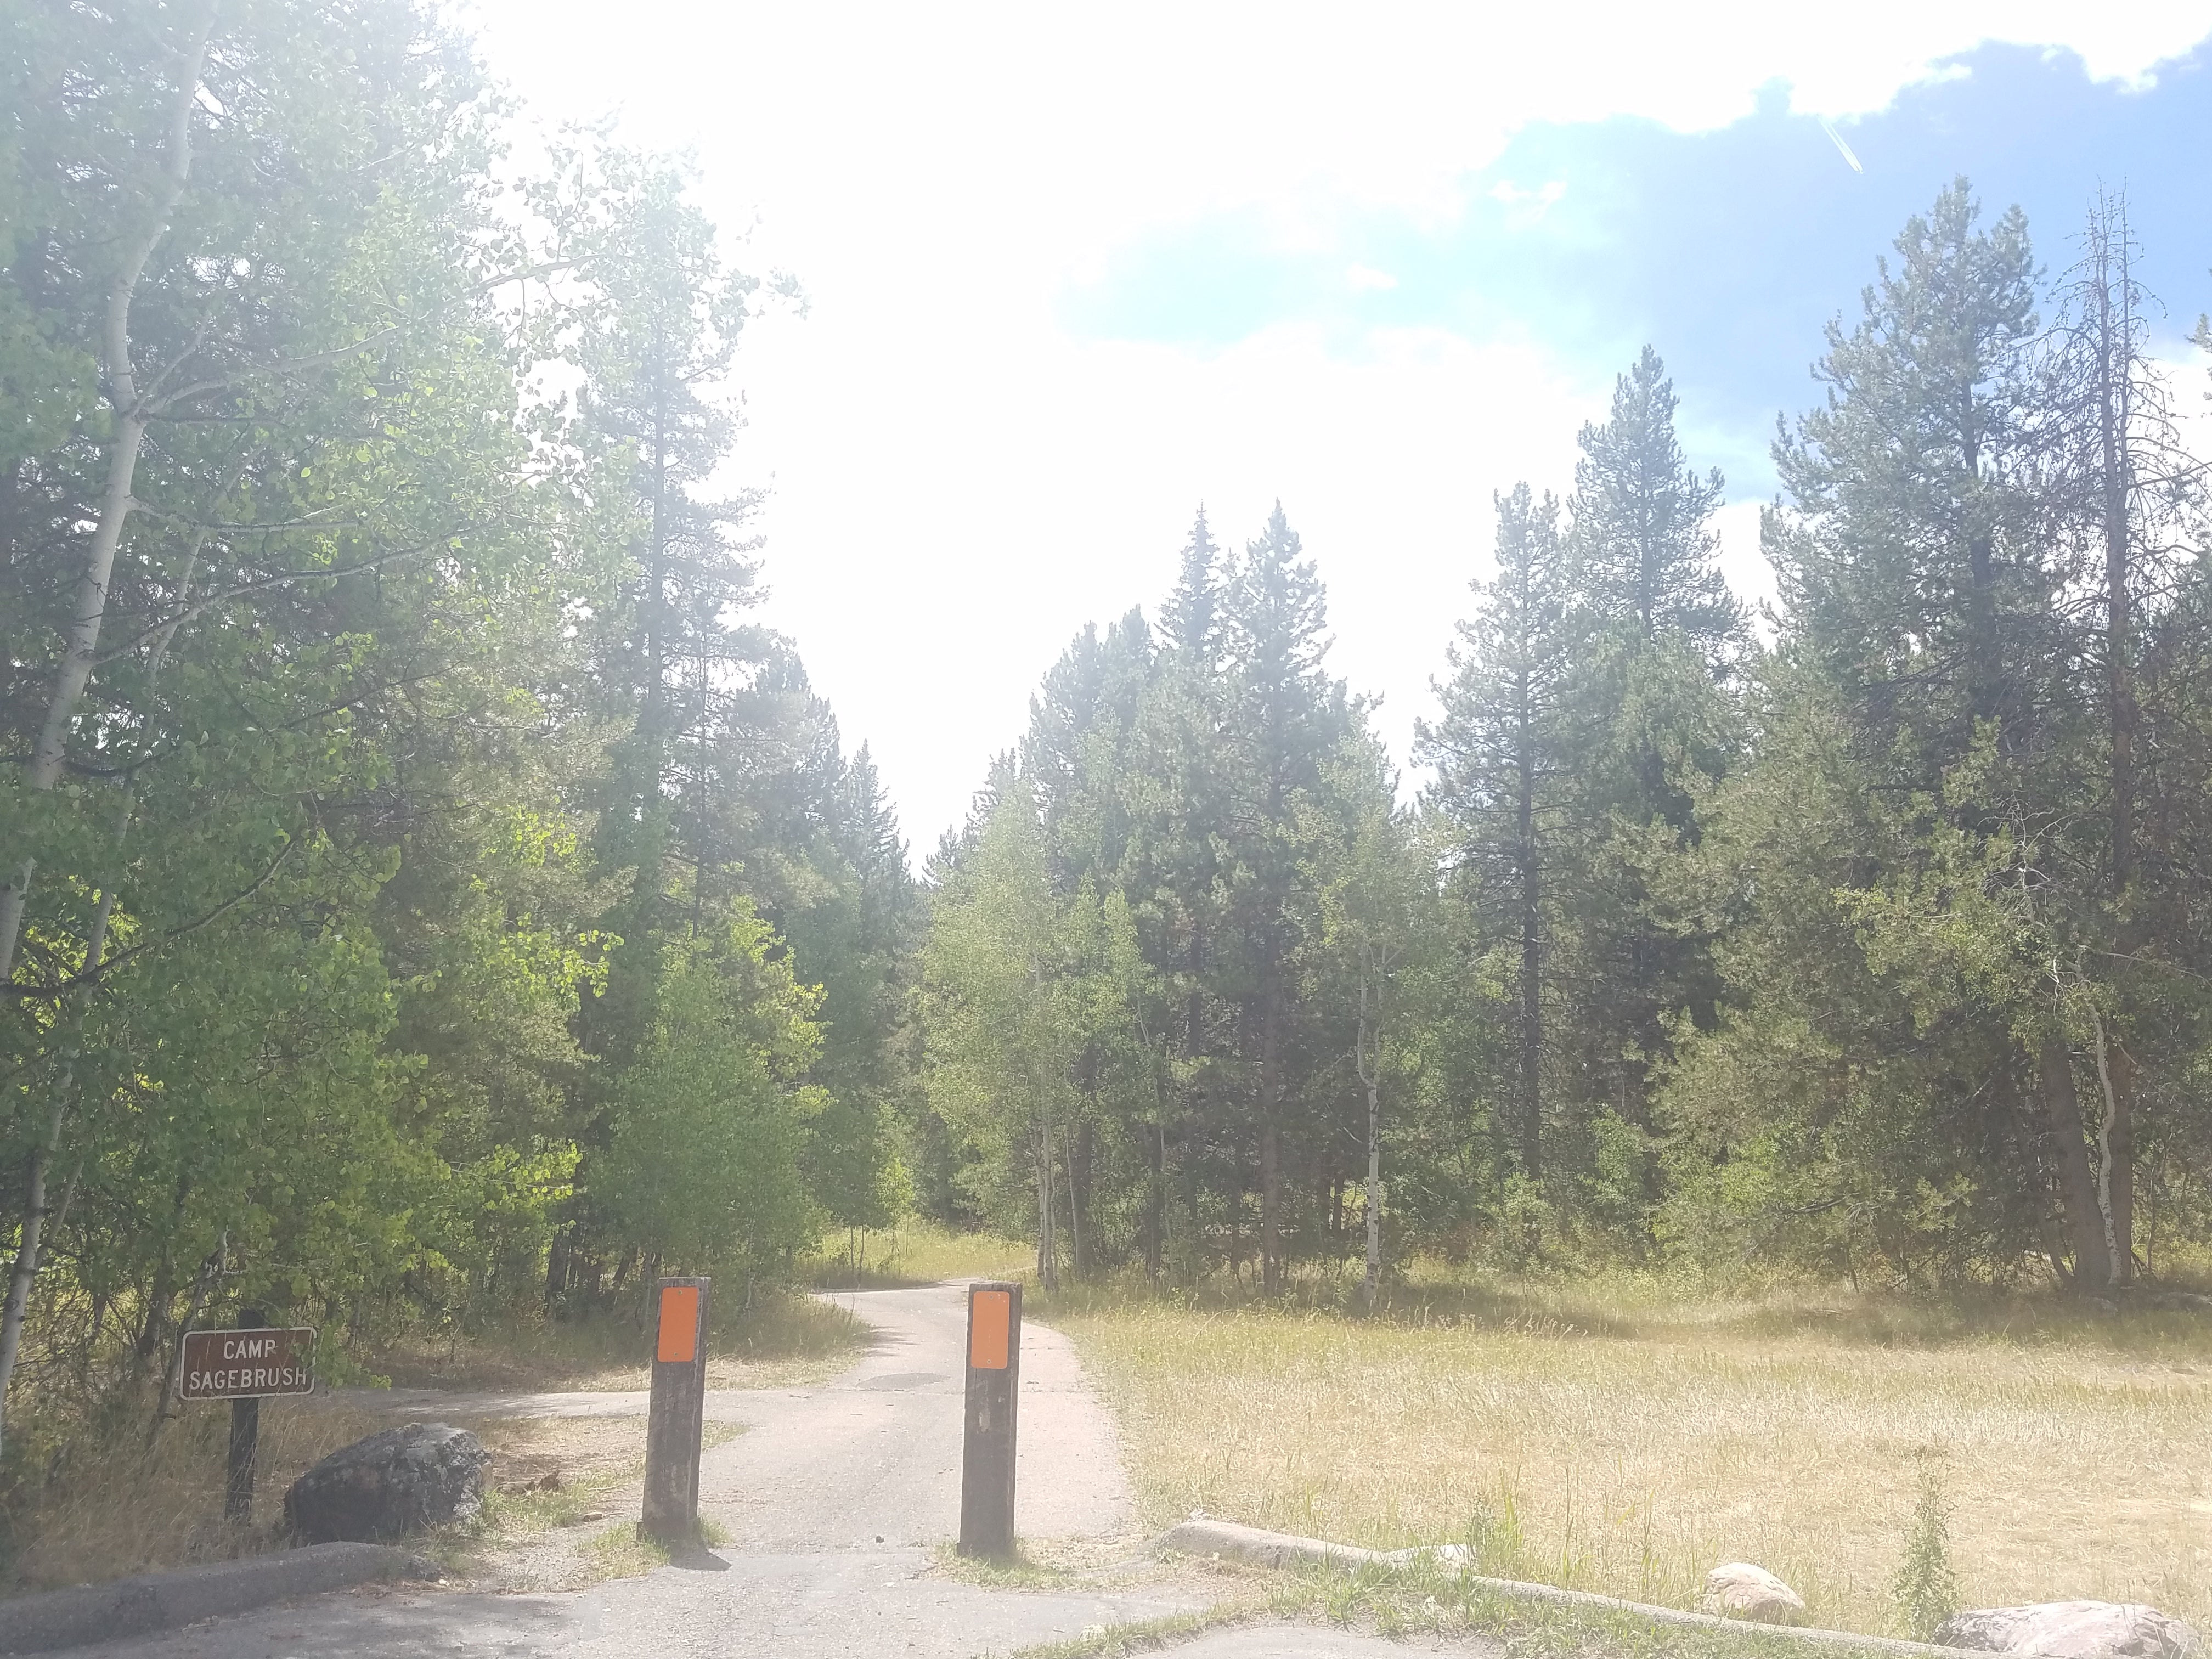 Camper submitted image from Pine Valley North Wasatch Cach - 1